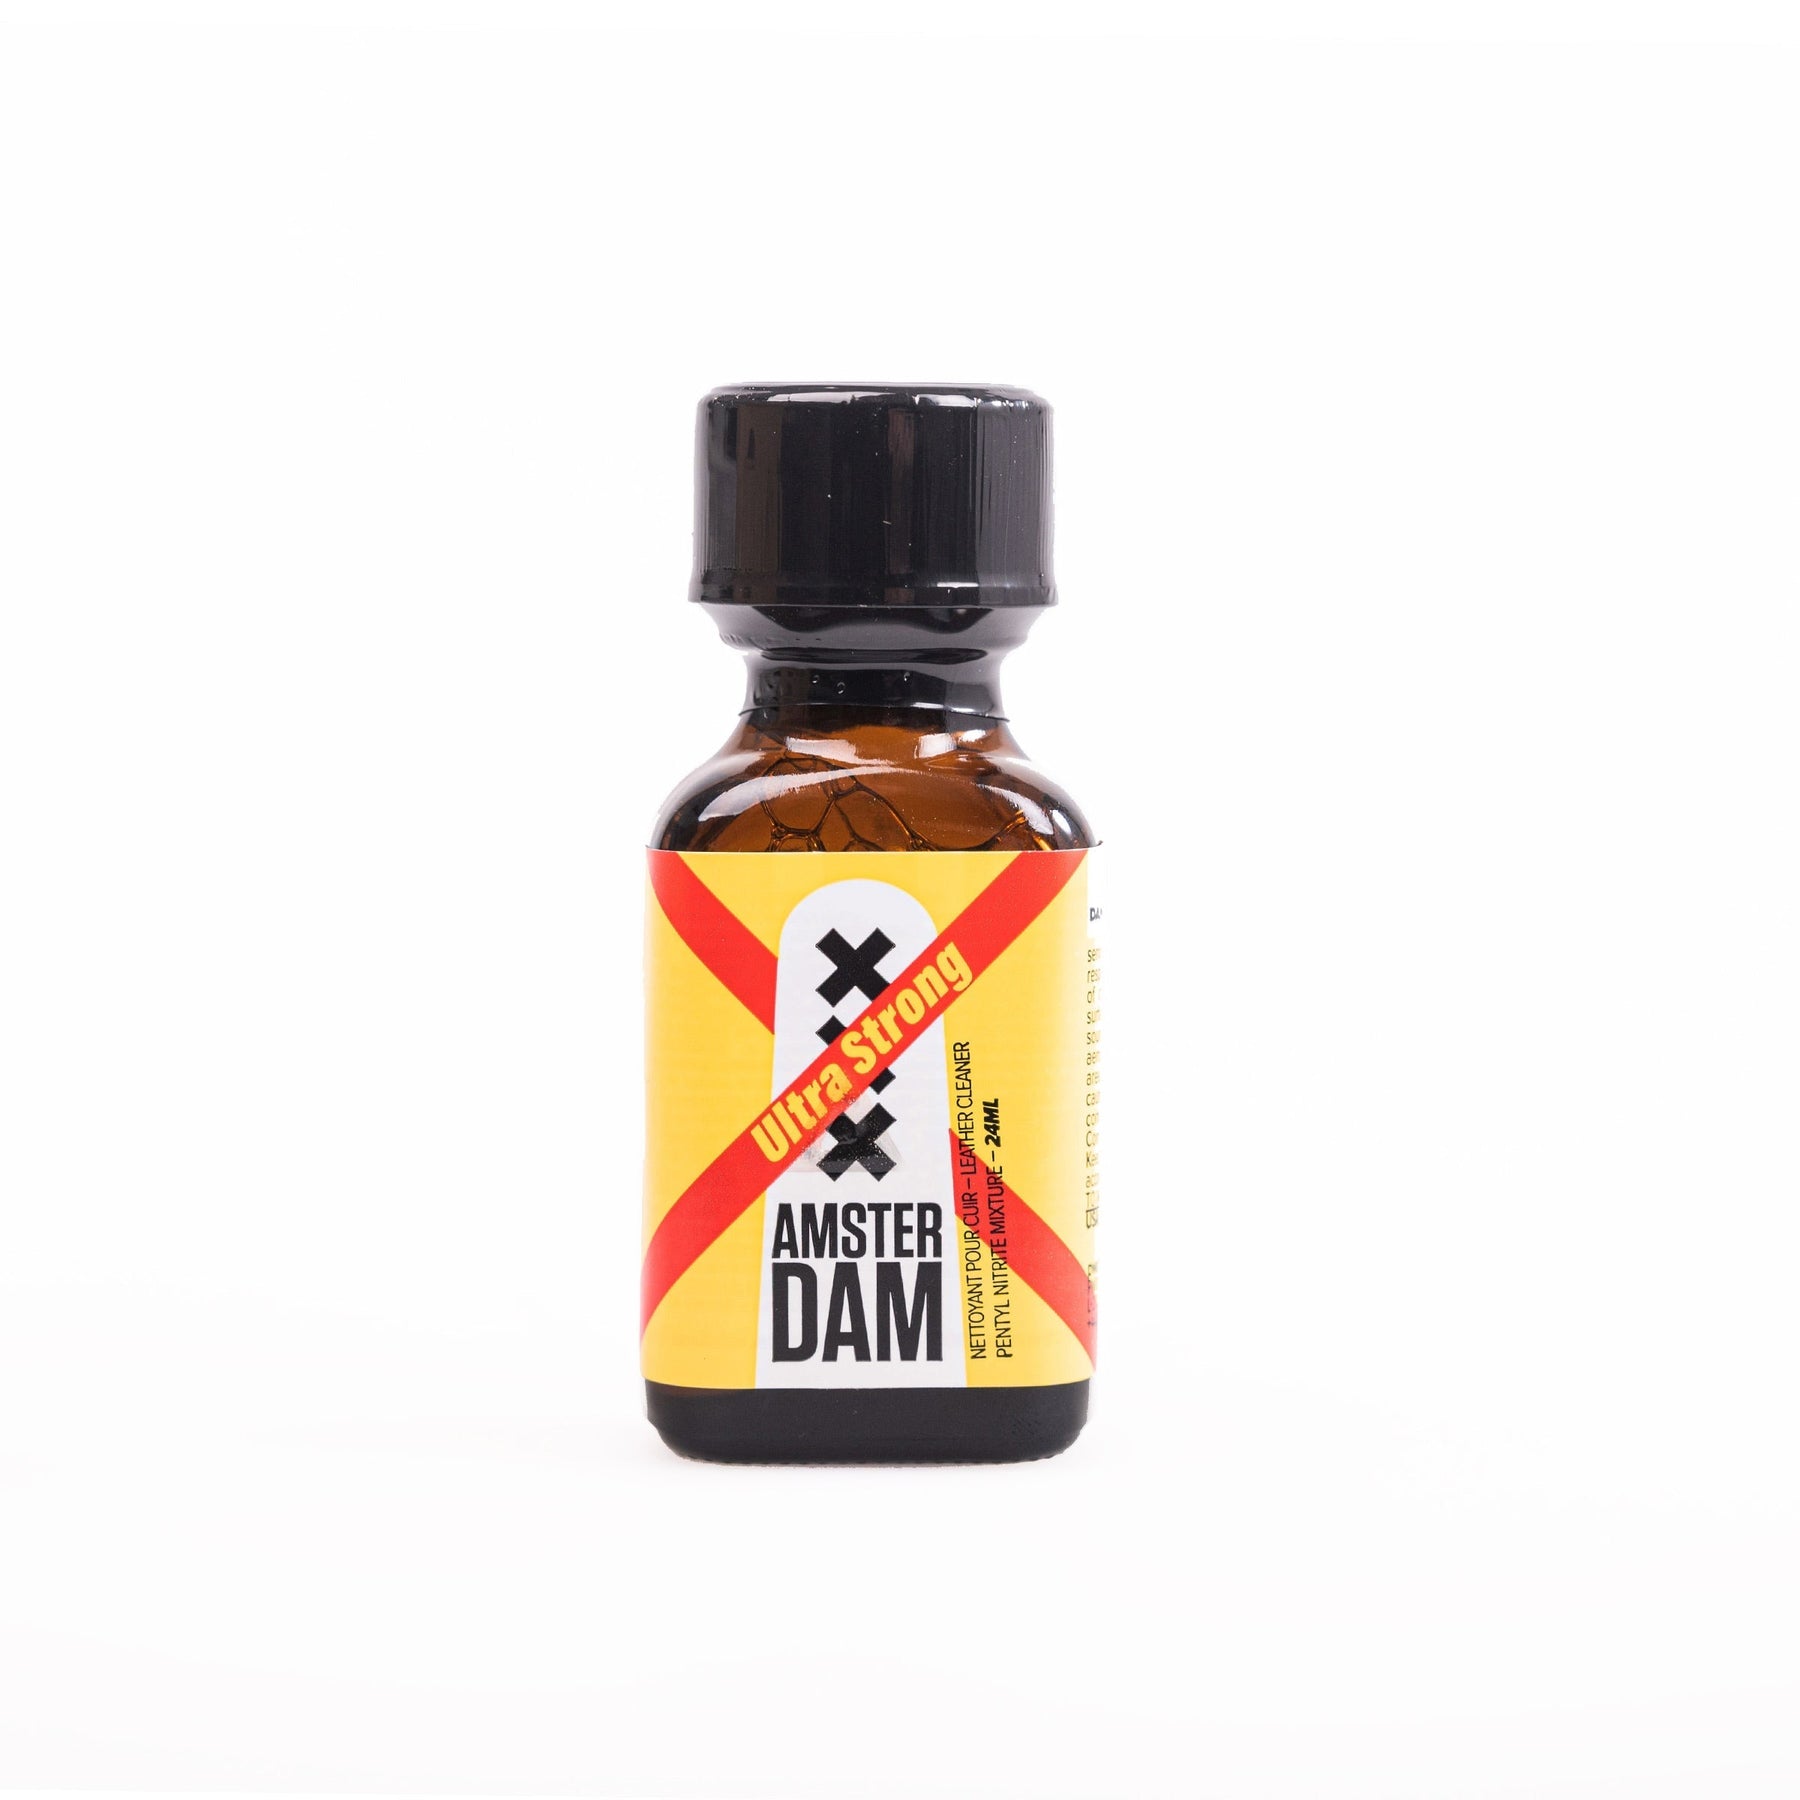 A small brown glass bottle with a yellow and black label that includes the word "Amsterdam XXX Ultra Strong Poppers" and caution symbols, isolated on a white background.